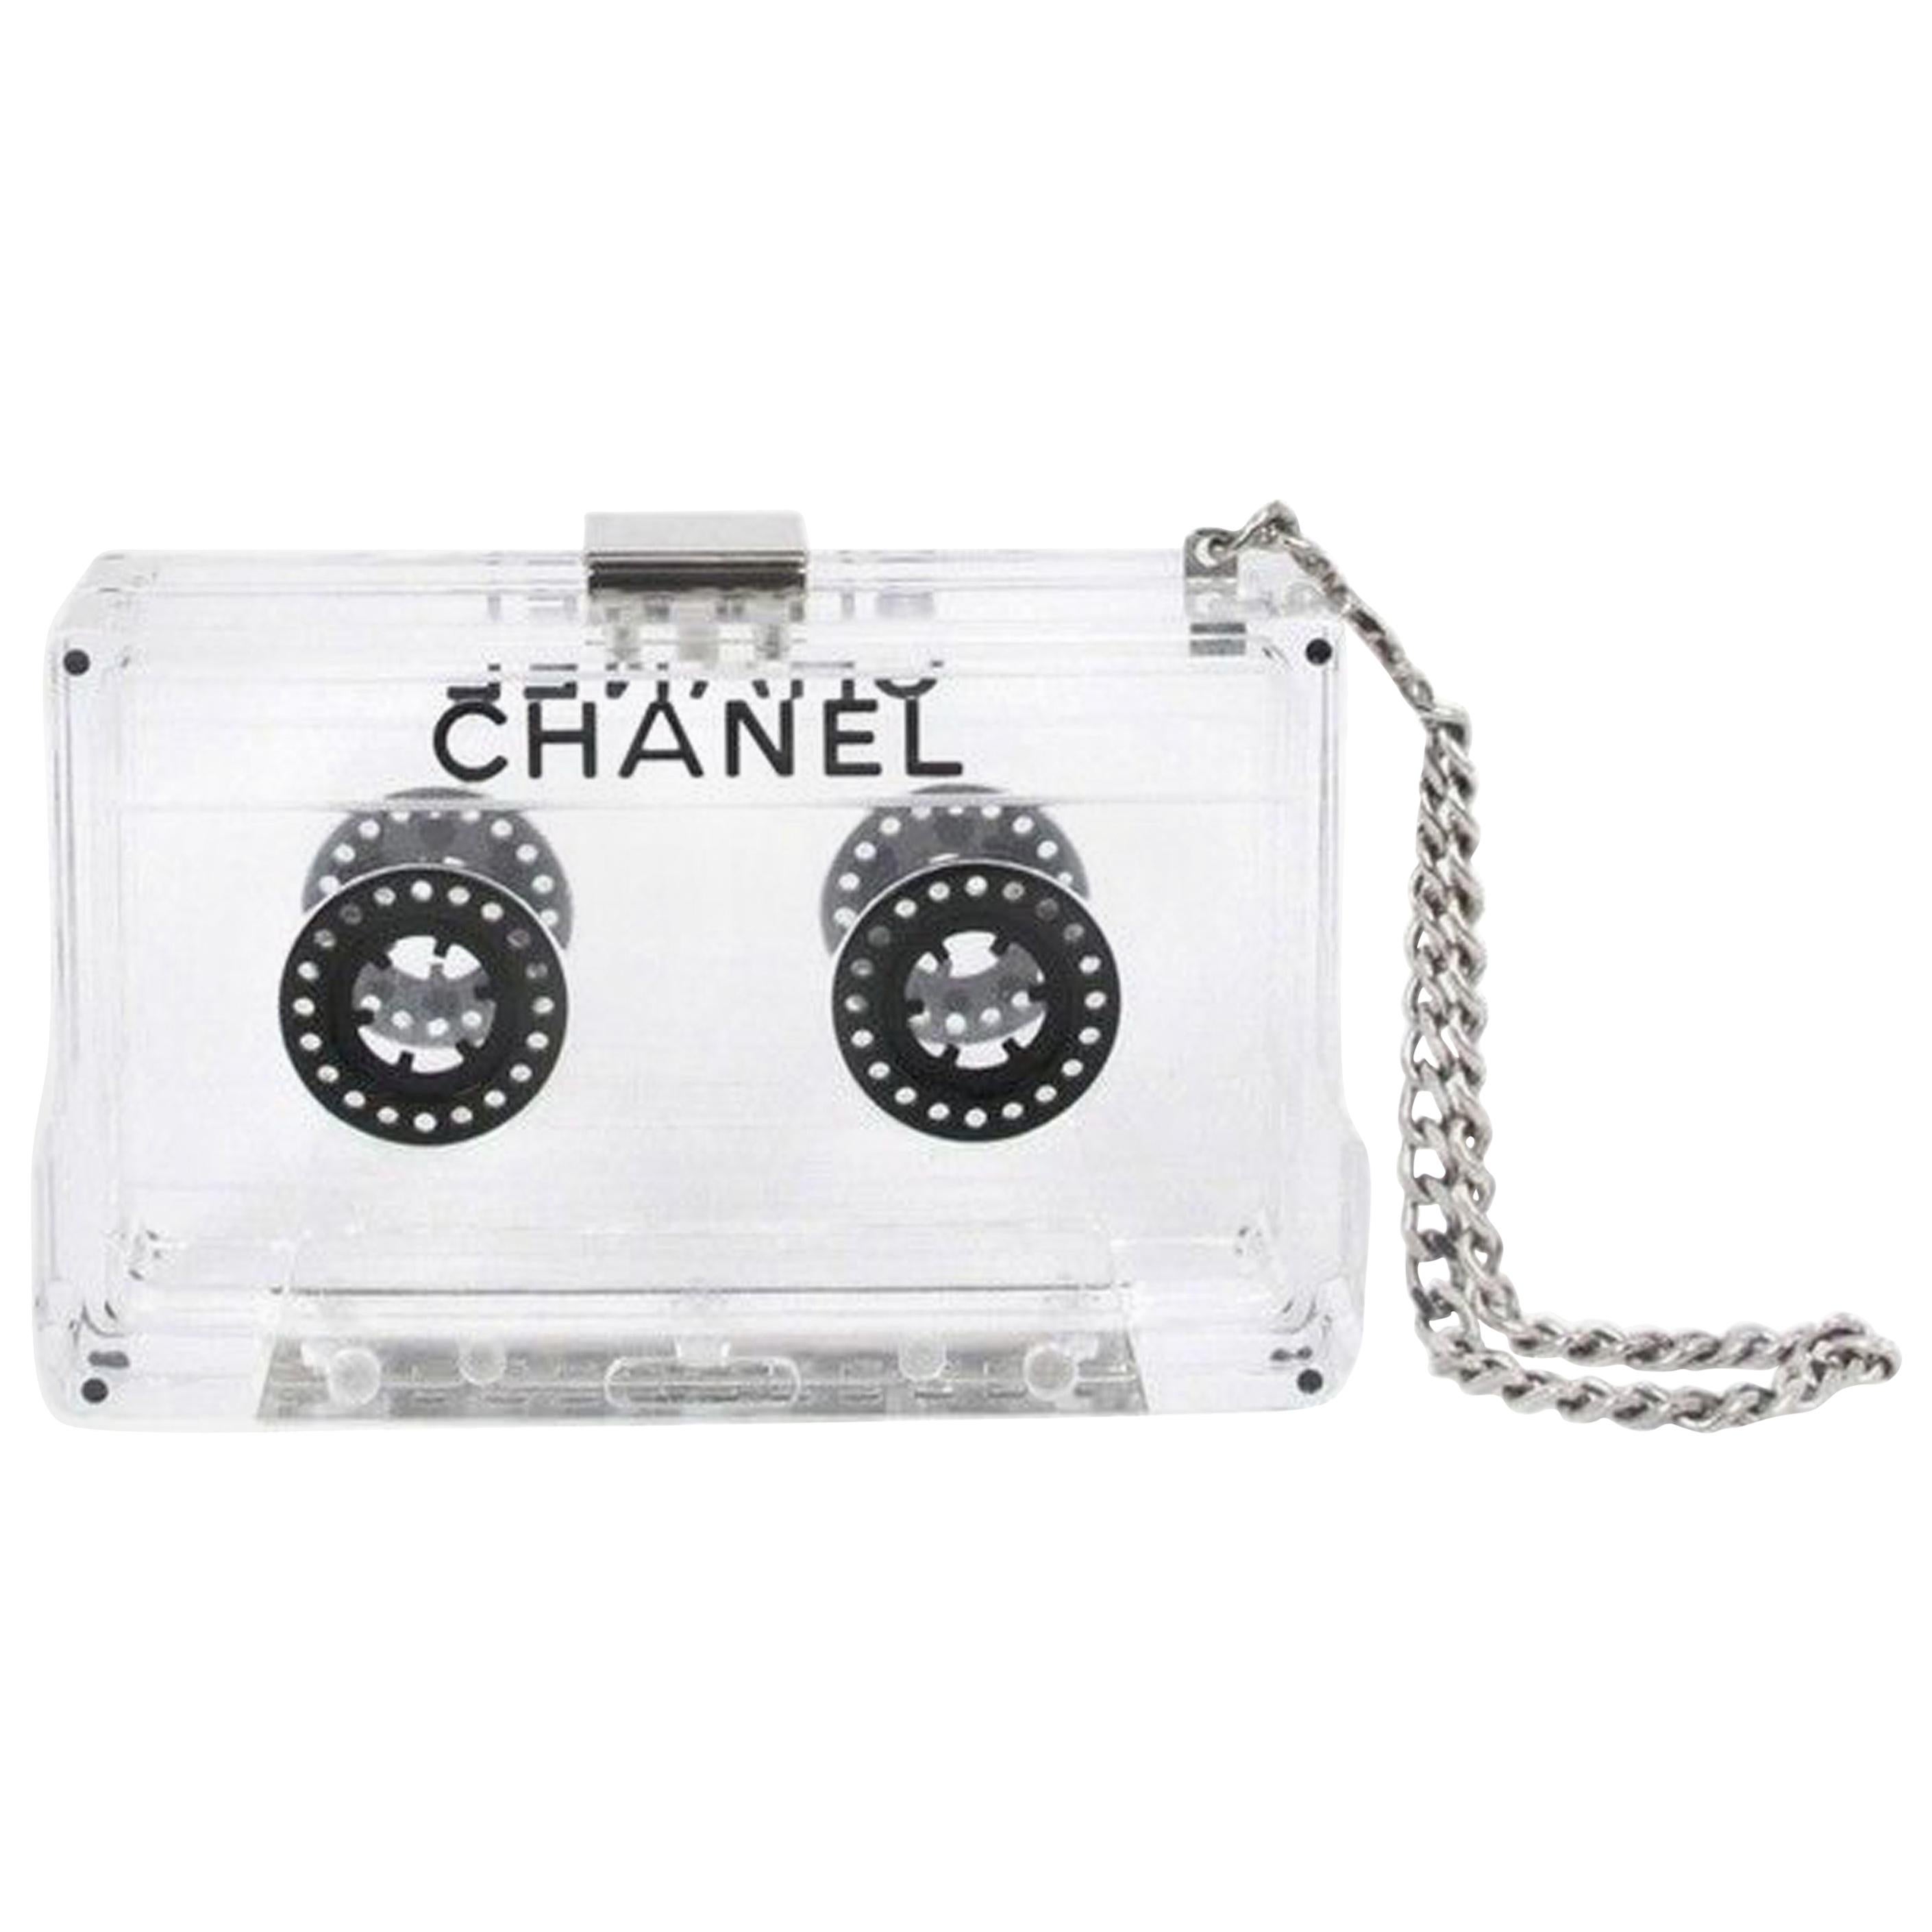 Chanel Lucite Cassette Player Clutch - Clear Clutches, Handbags